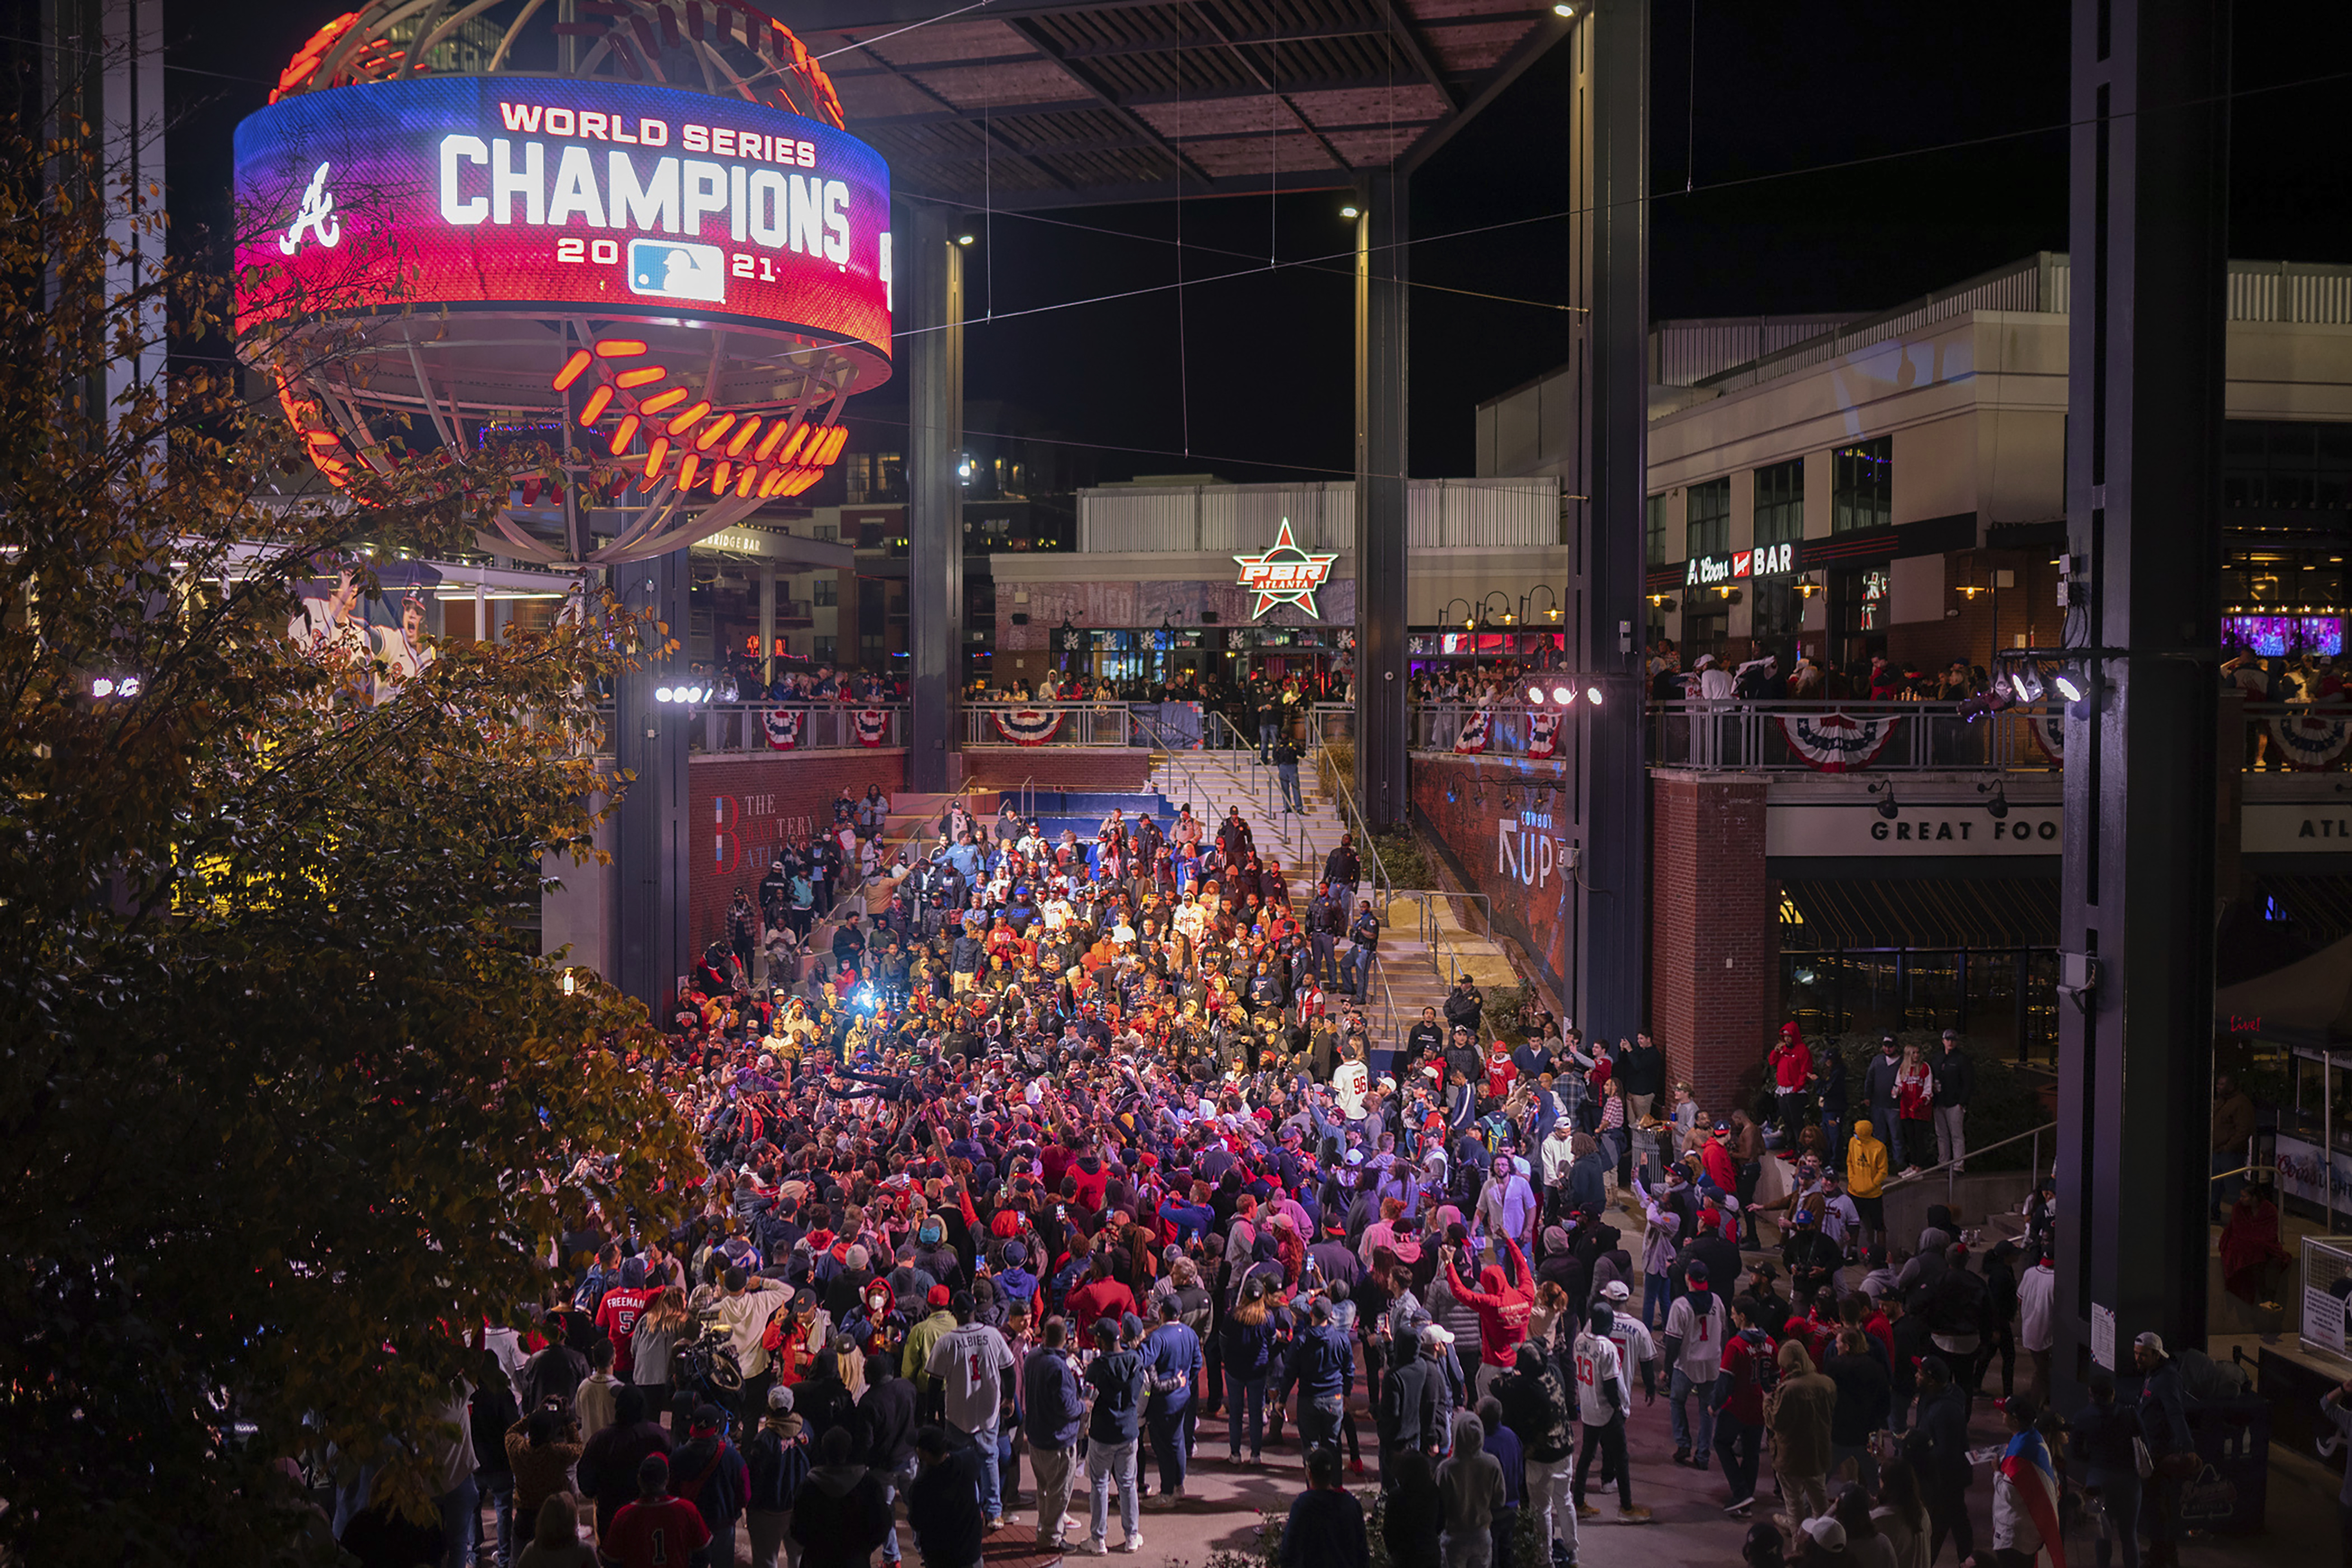 Braves parade, concert World Series tickets sold out Truist Park